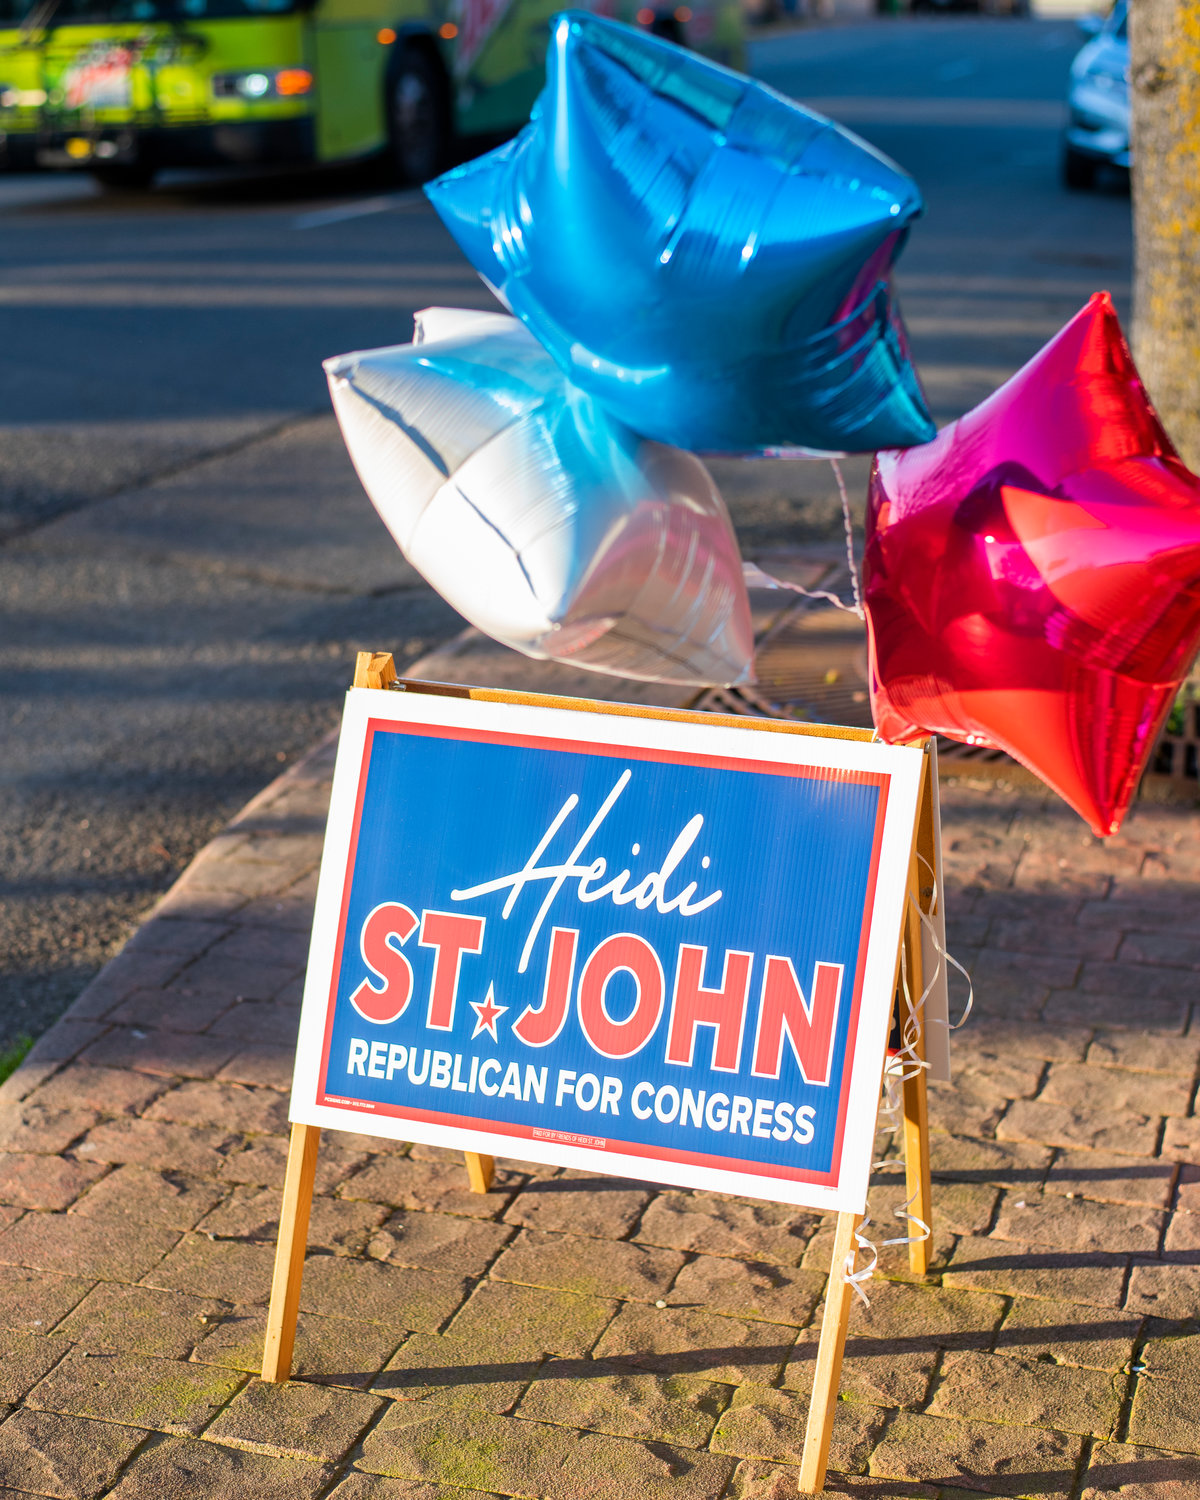 Red, white and blue balloons wave in the wind while tied to a Heidi St. John election sign Tuesday afternoon in downtown Centralia.